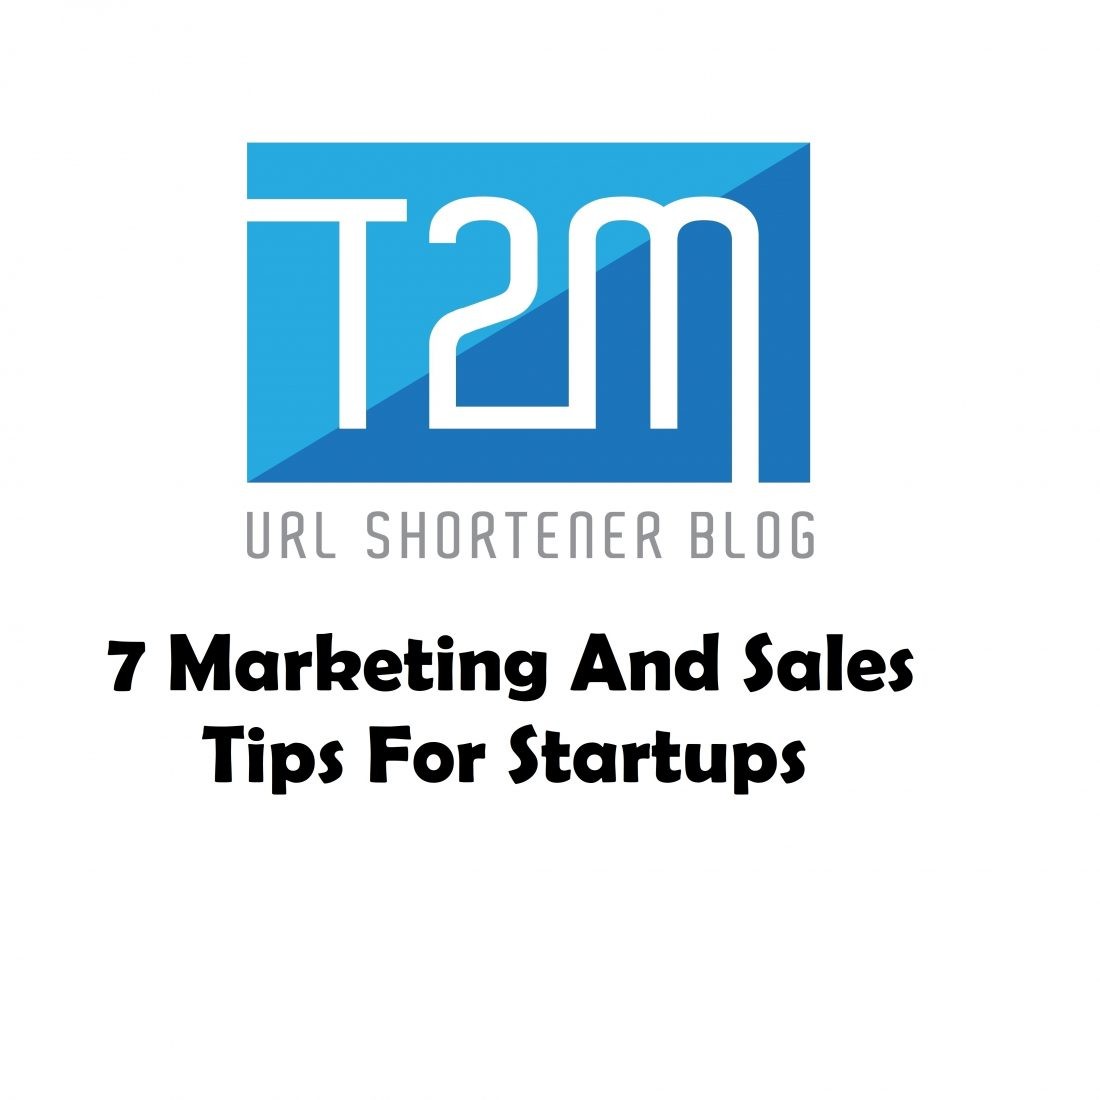 7 Marketing And Sales Tips For Startups